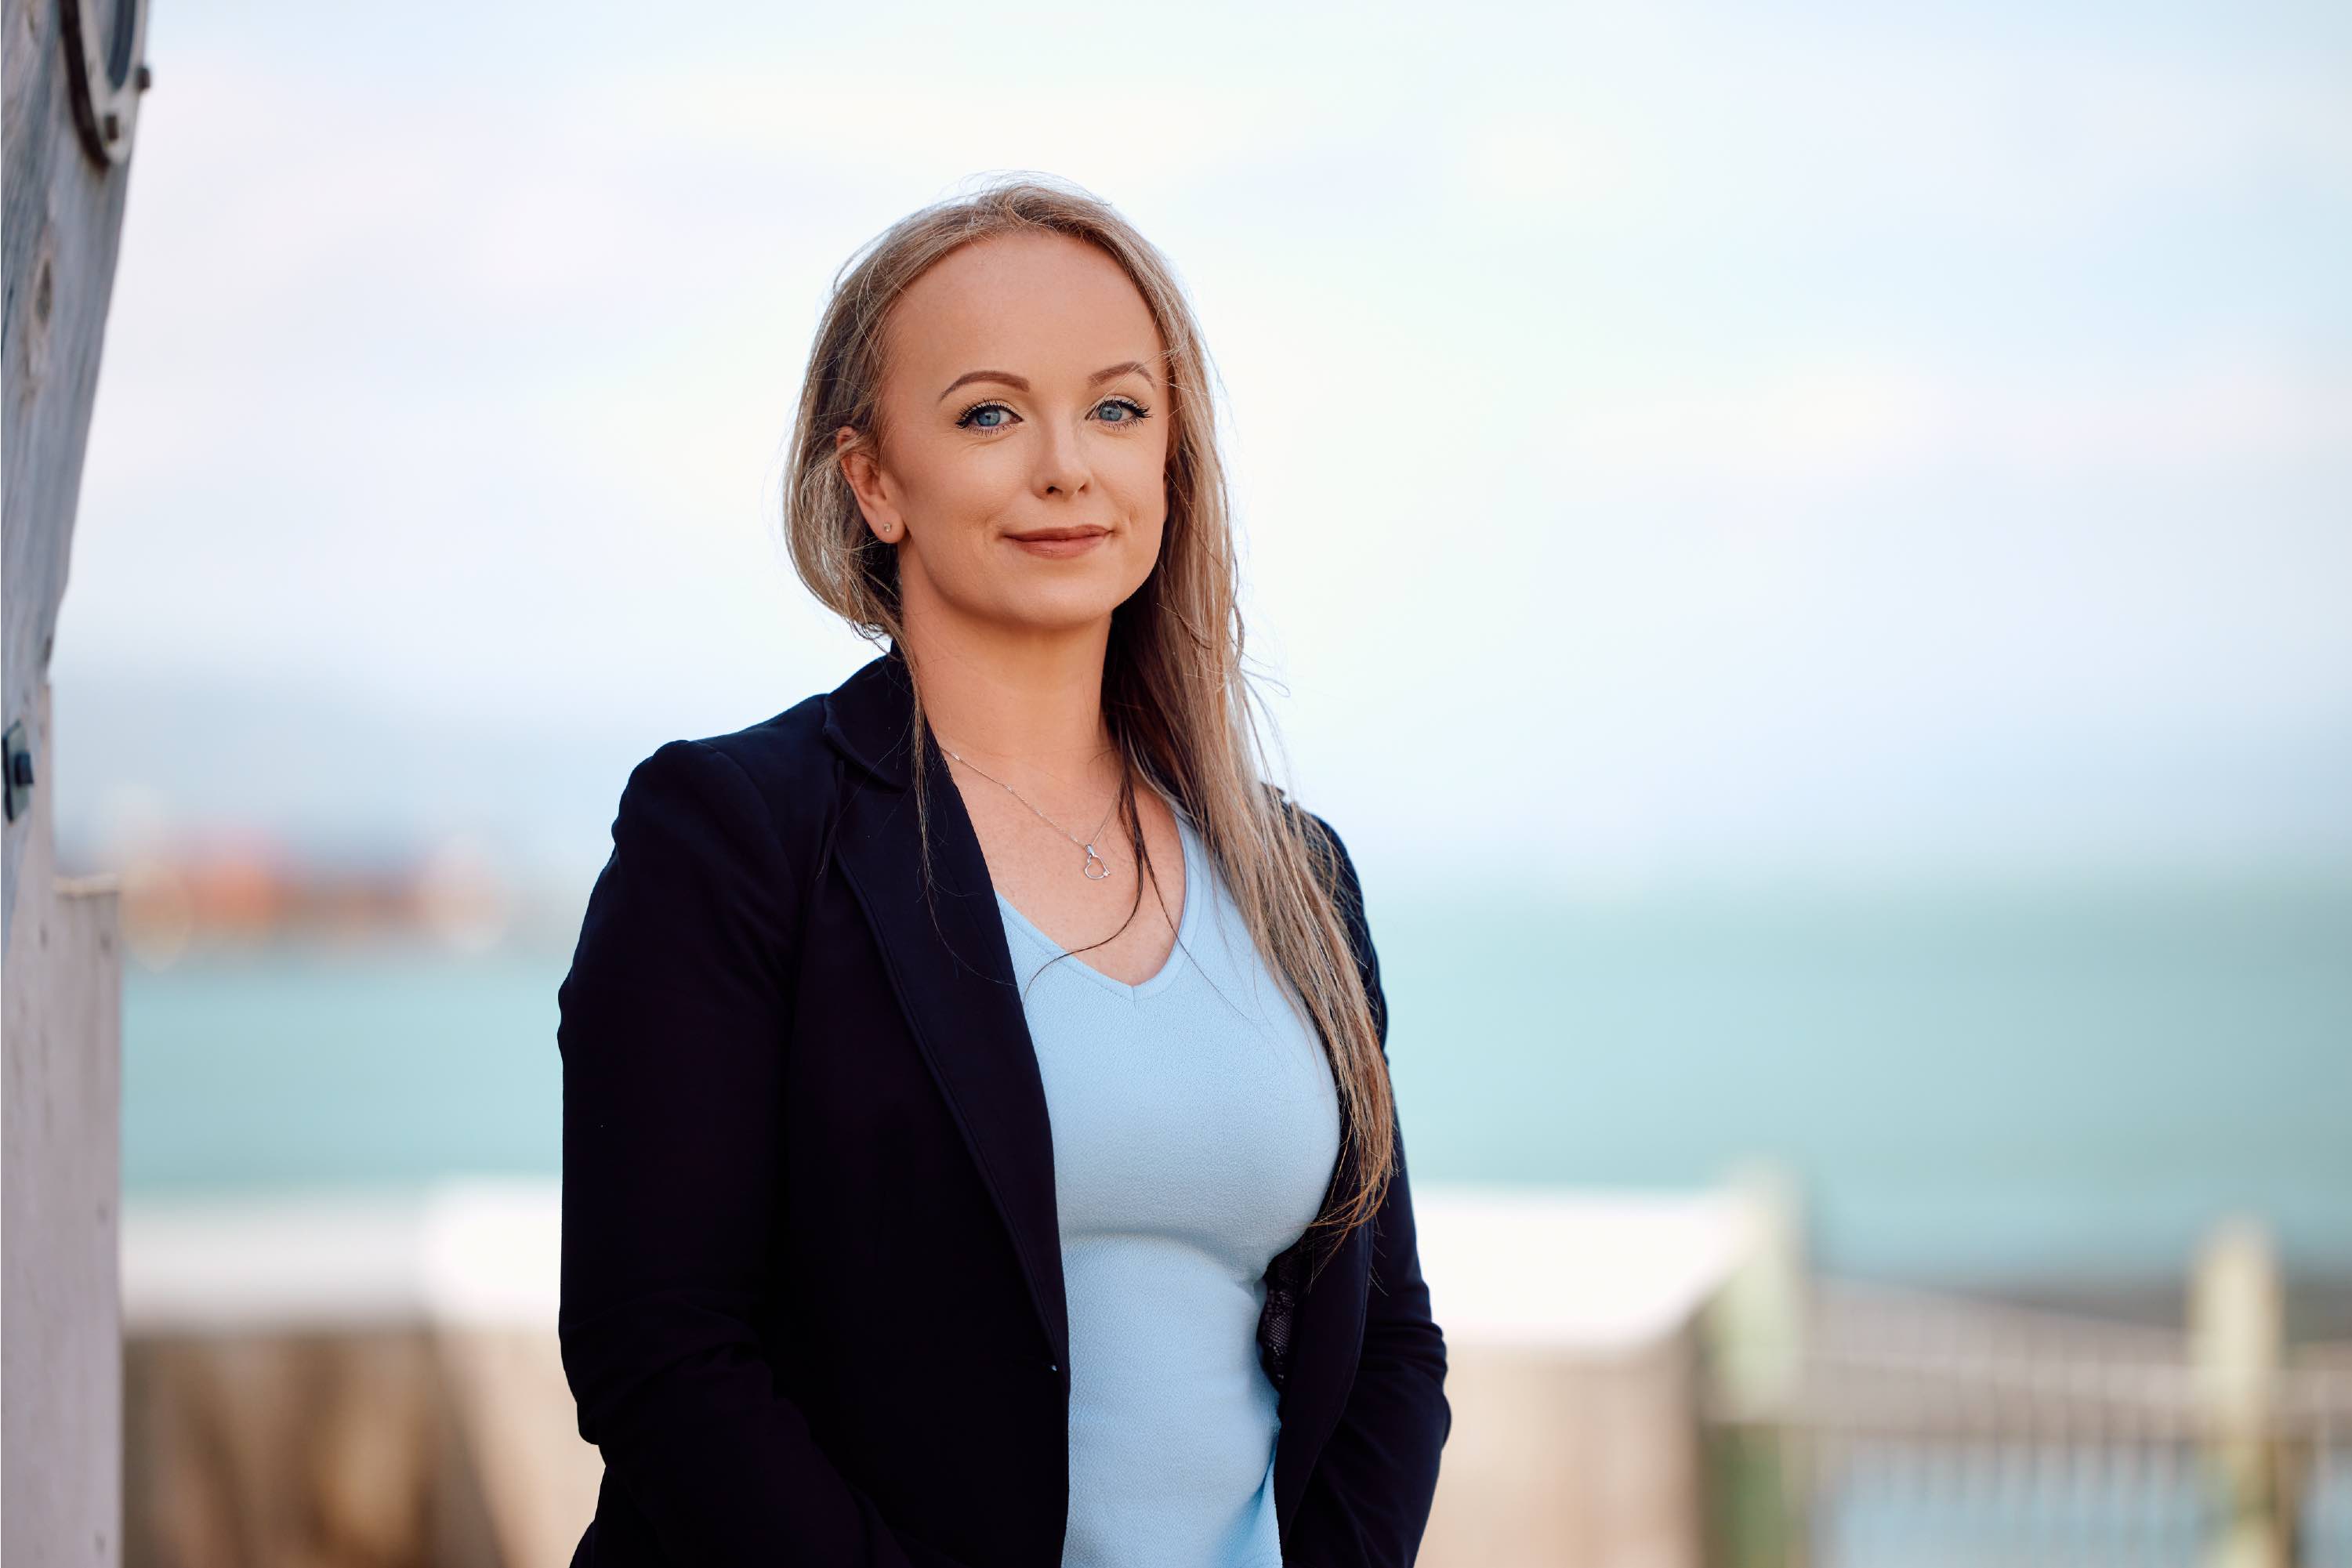 Datacom's cybersecurity operations team manager Monique Mckenna